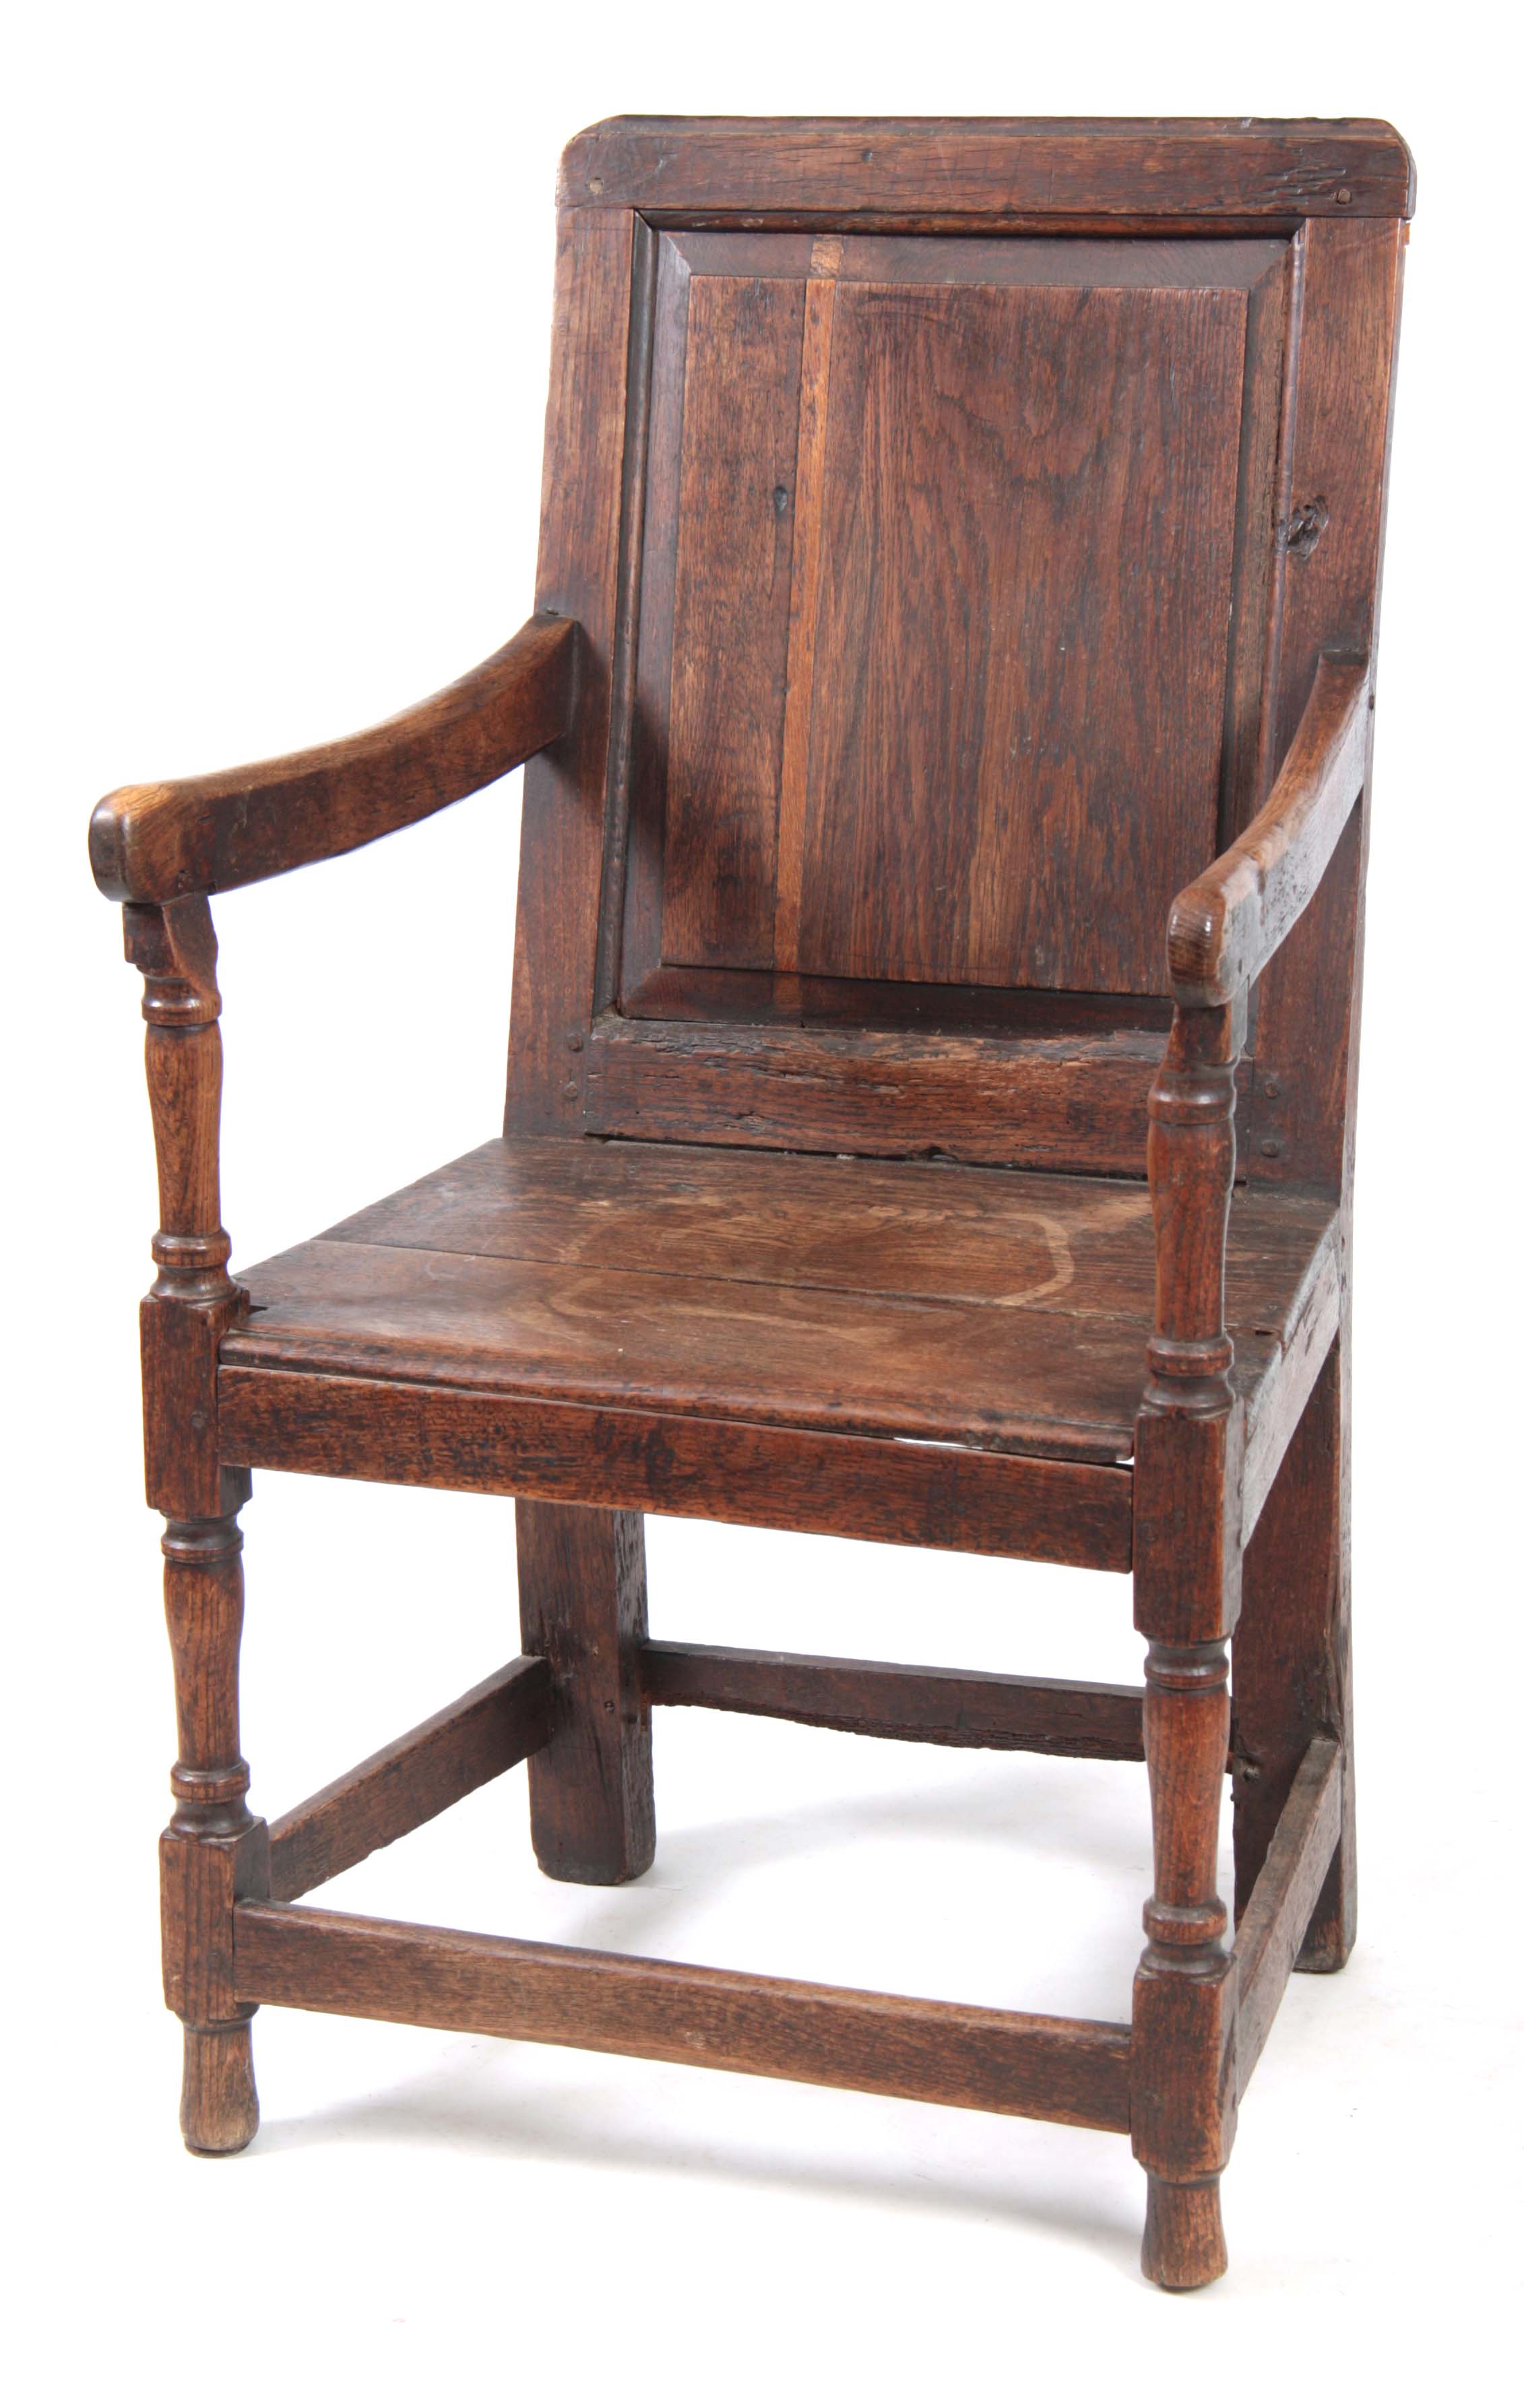 AN EARLY 18TH CENTURY OAK WAINSCOT CHAIR having fielded panel back with open arms and turned